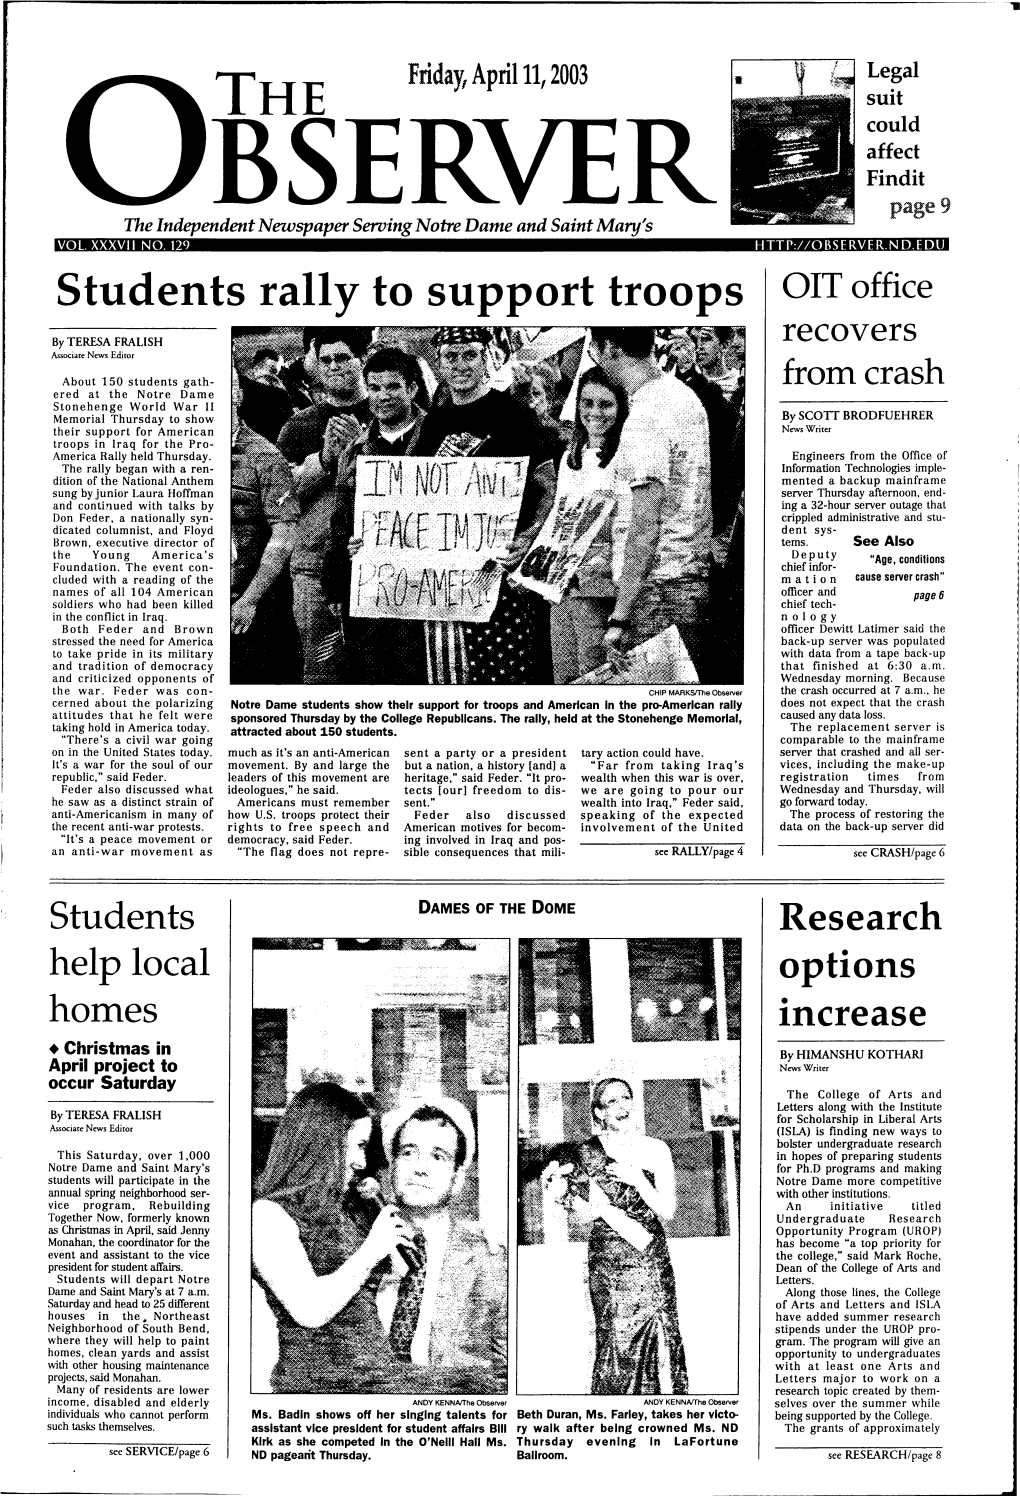 Students Rally to Support Troops OIT Office